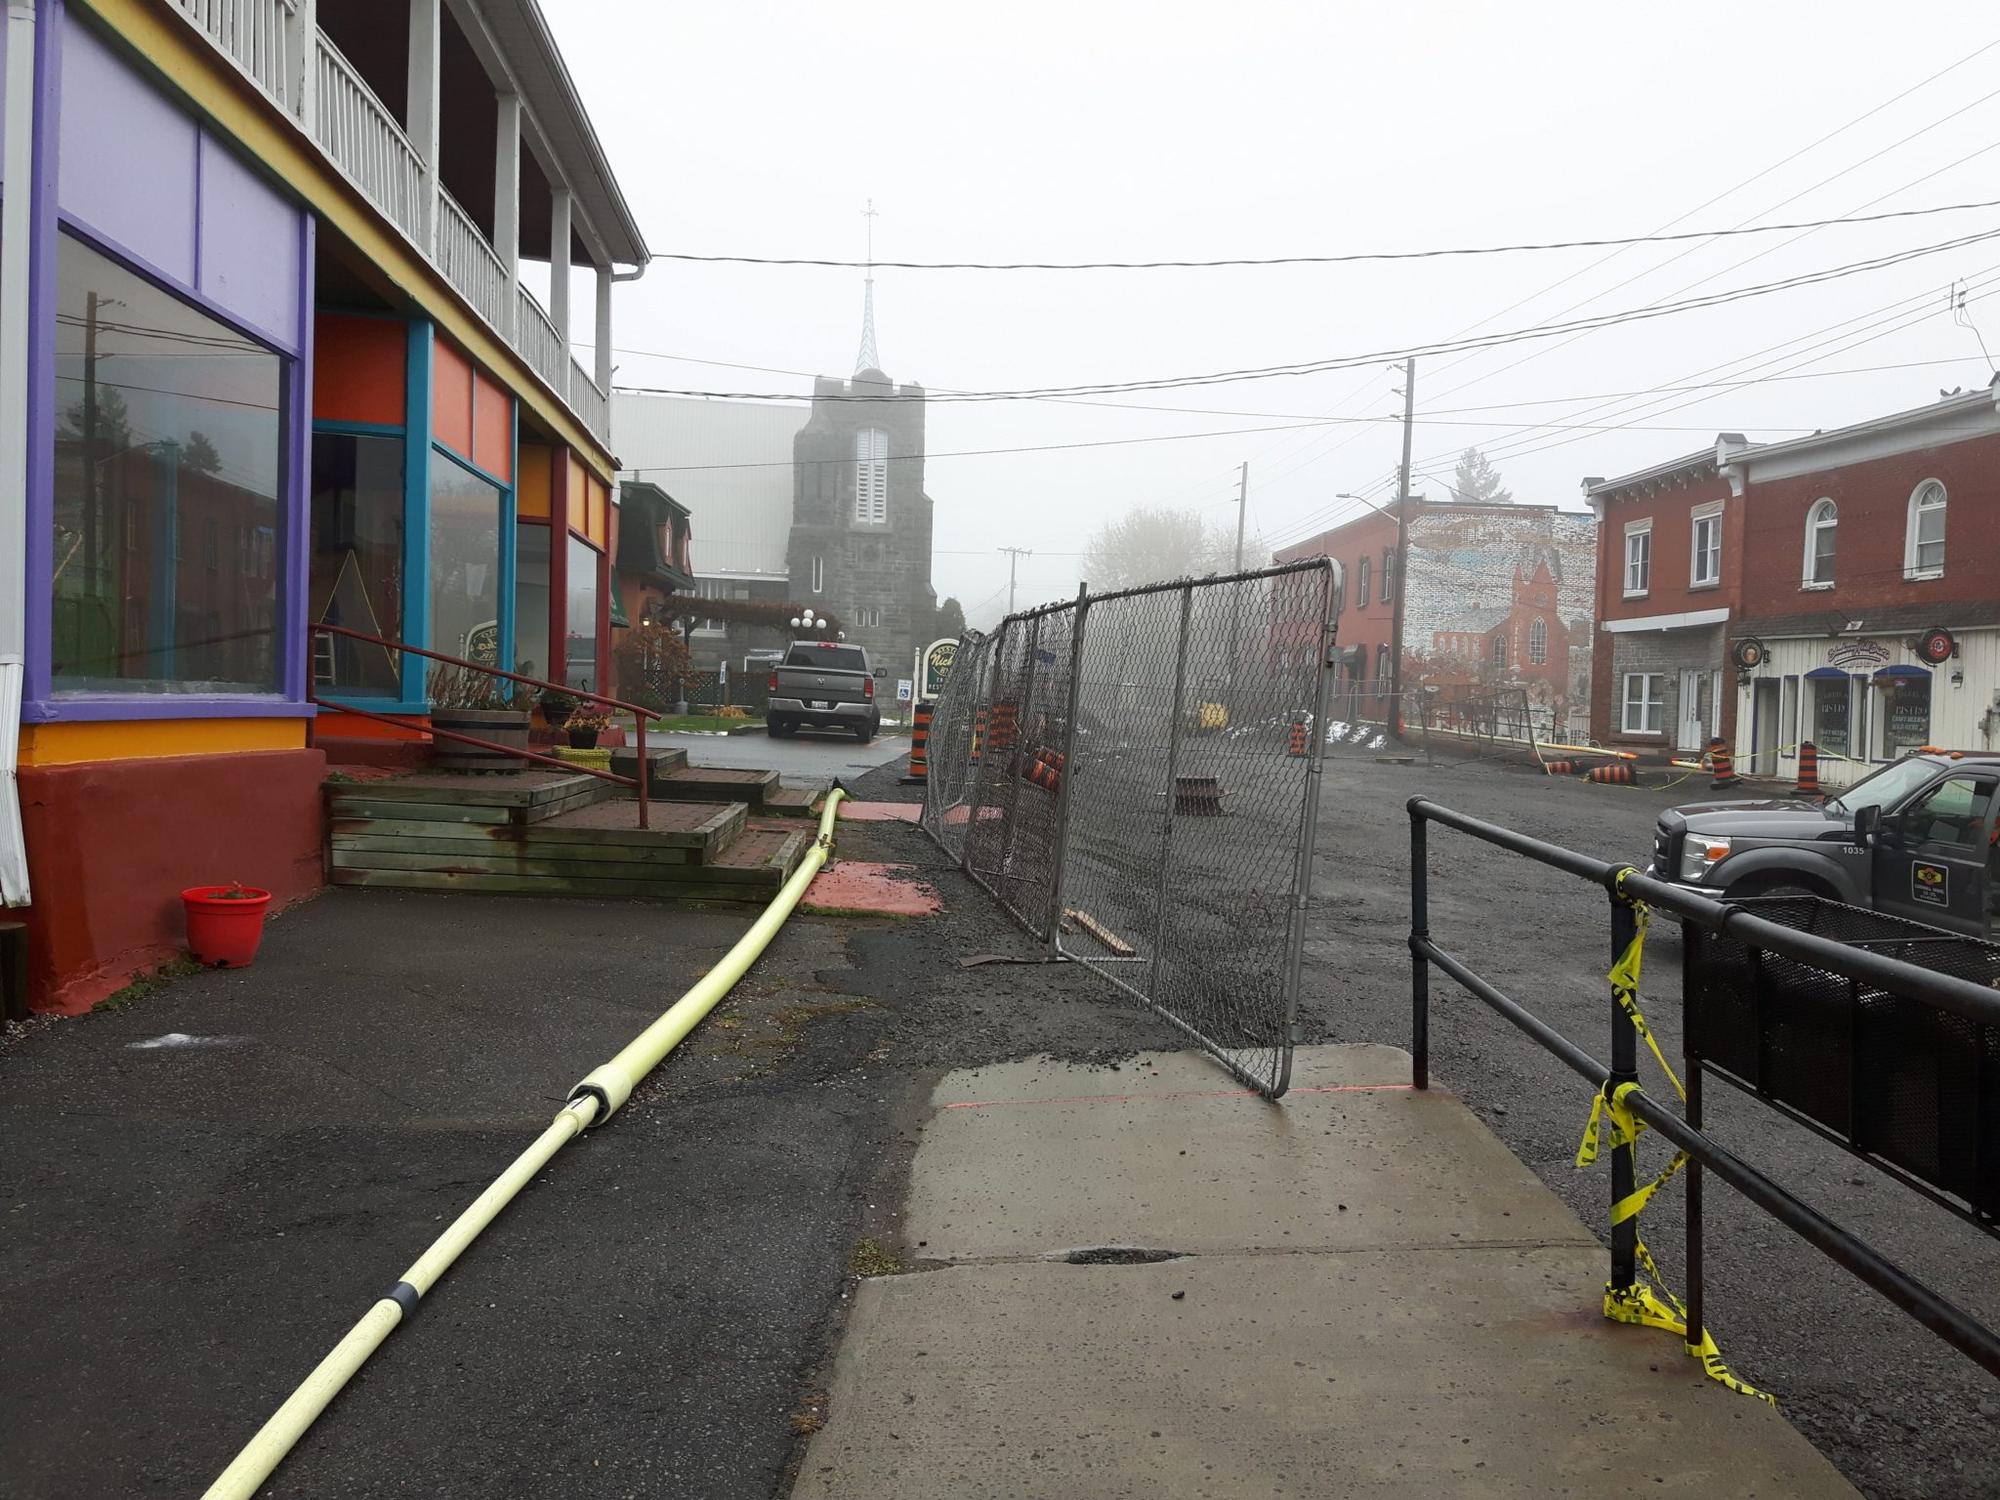 Construction still causing strife for businesses, residents on High Street